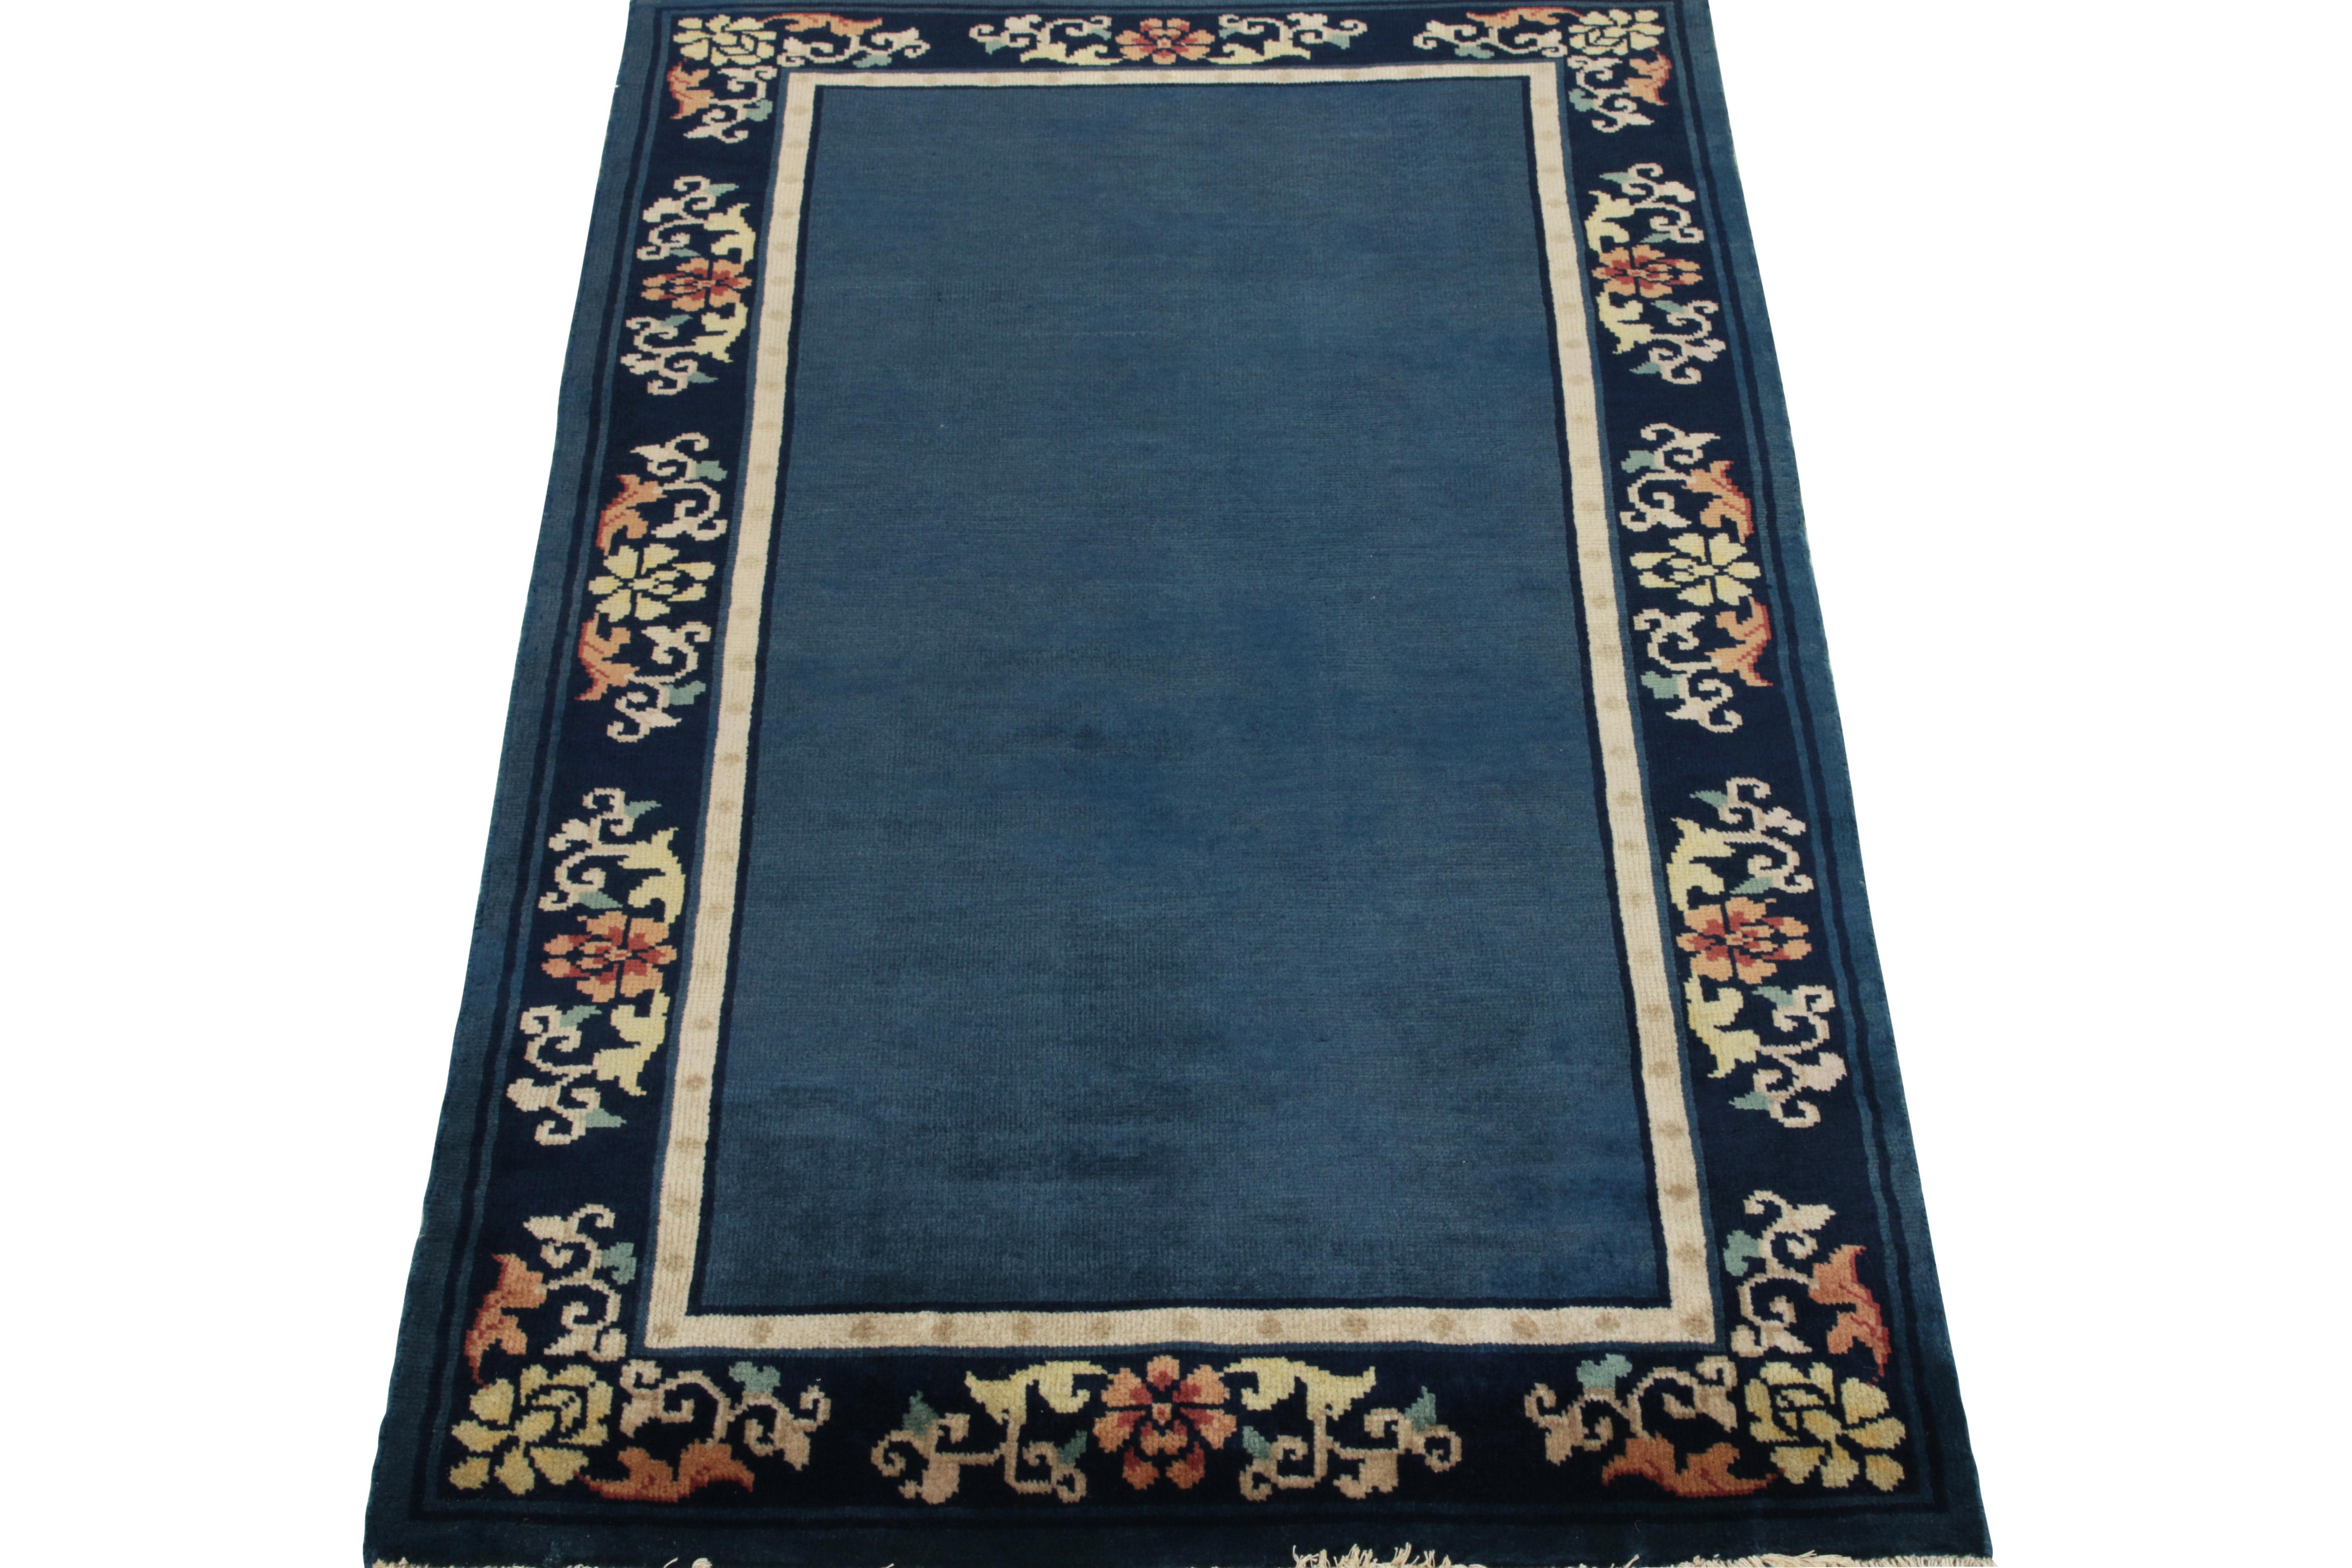 Showcasing a floral pattern in beige, teal, reddish orange & sky blue tones in the outer border, a Chinese Deco style vintage rug observing light-dark spots in blue tones connoting a very classic appeal of the 1920s. Further enjoying a fine light